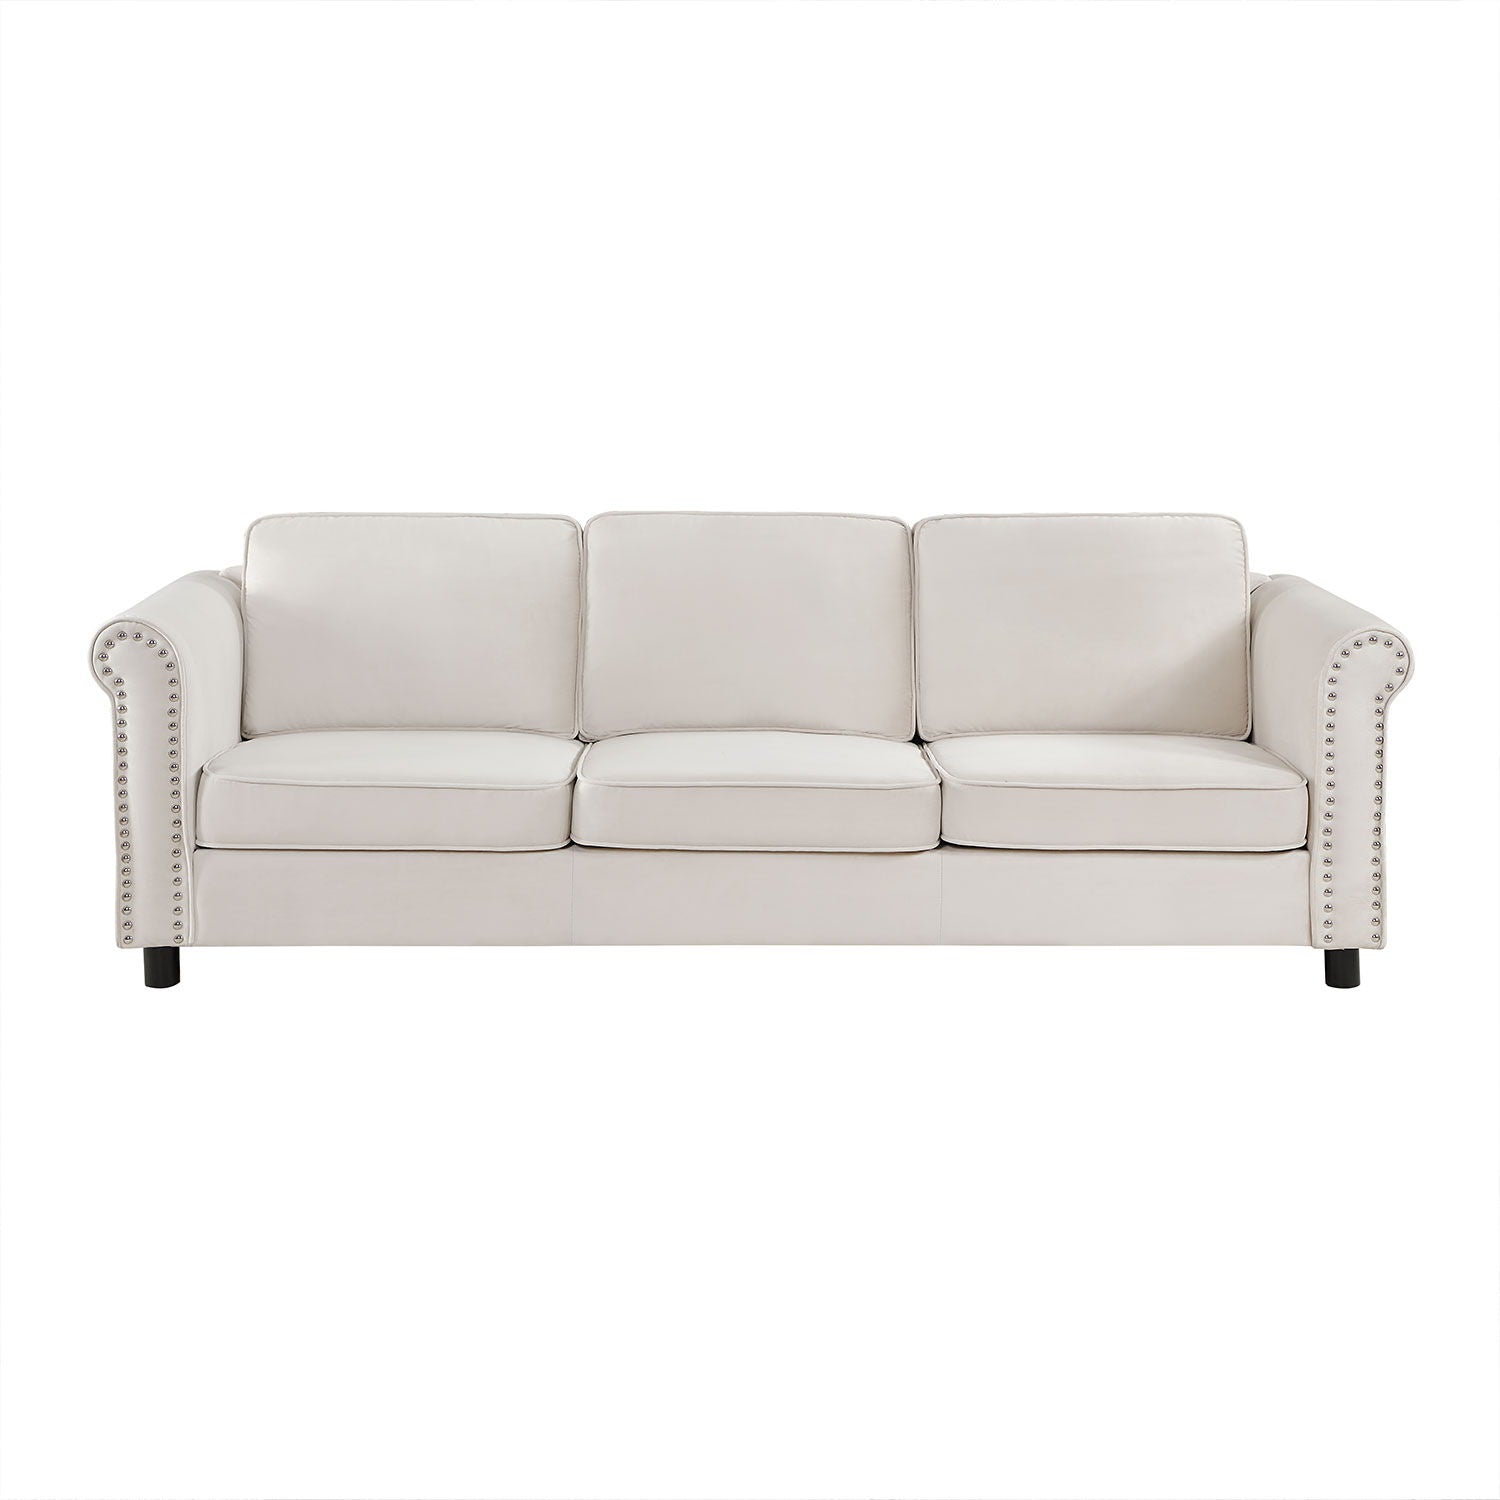 89.37" Mid-Century Modern Couch Velvet Sofa Couch 3 Seater Sofa, Beige